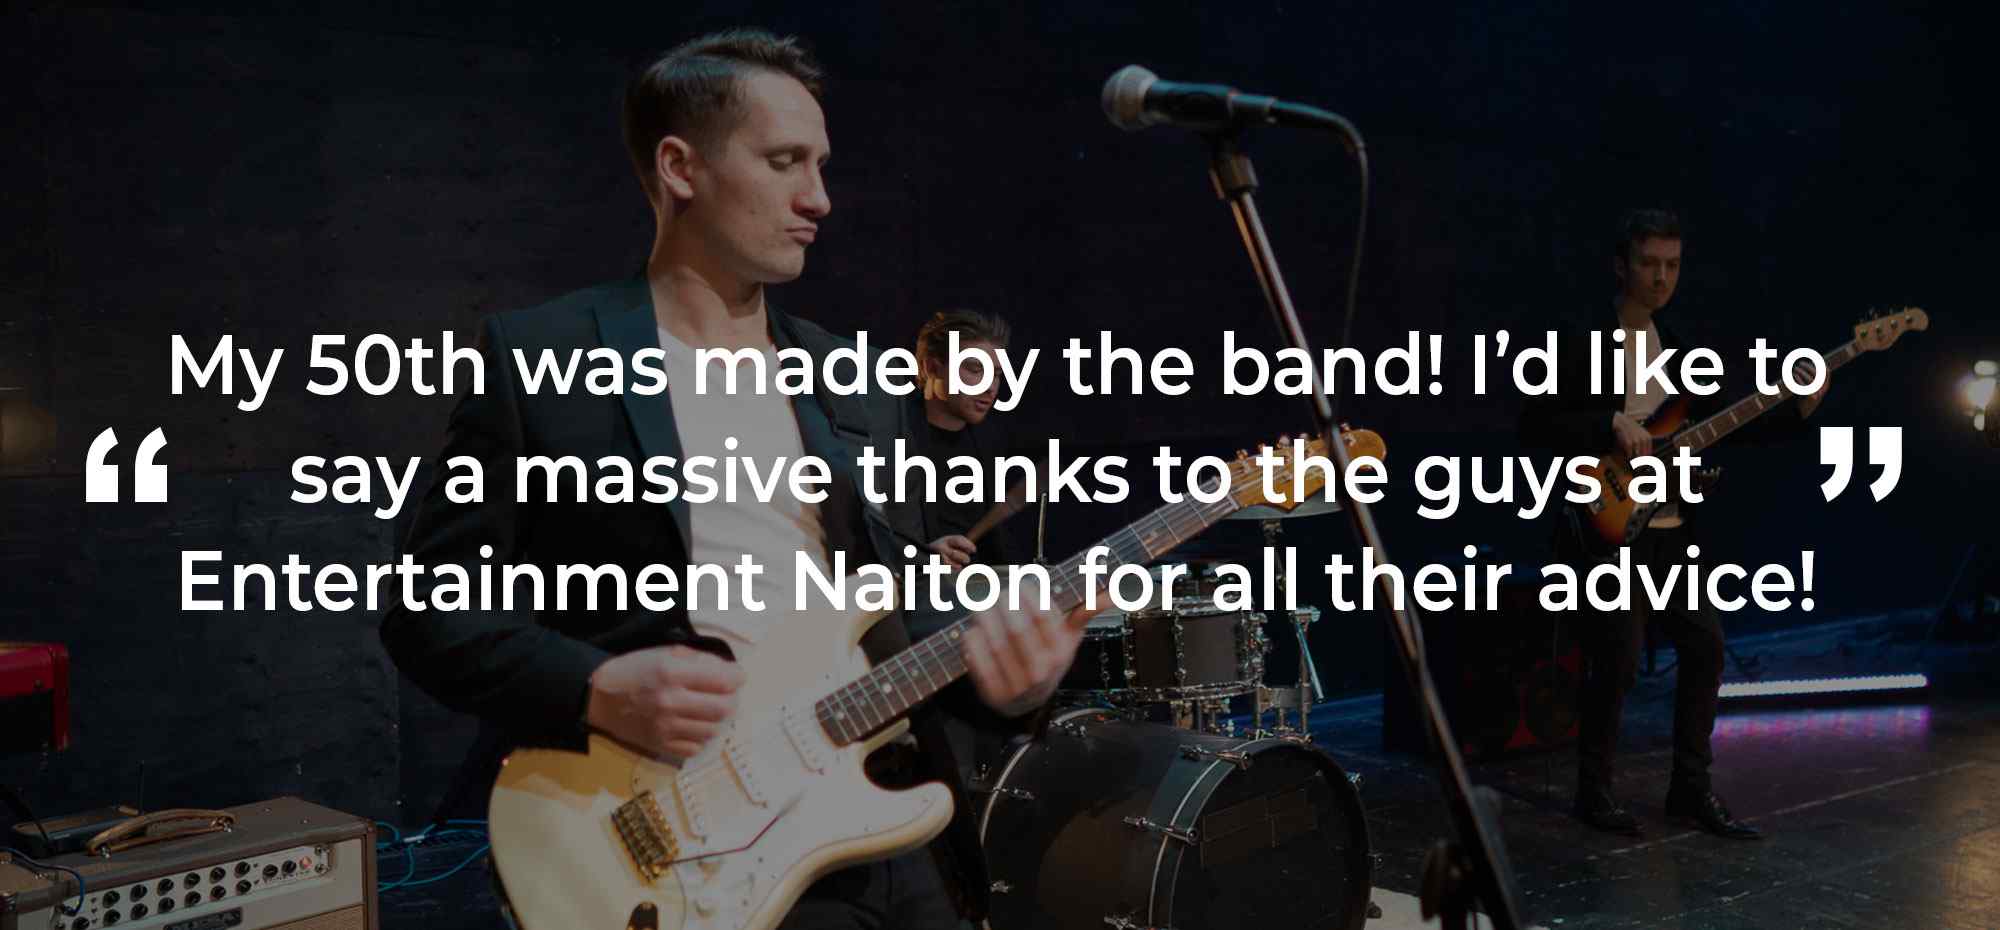 Client Review of a Party Band Isle Of Wight